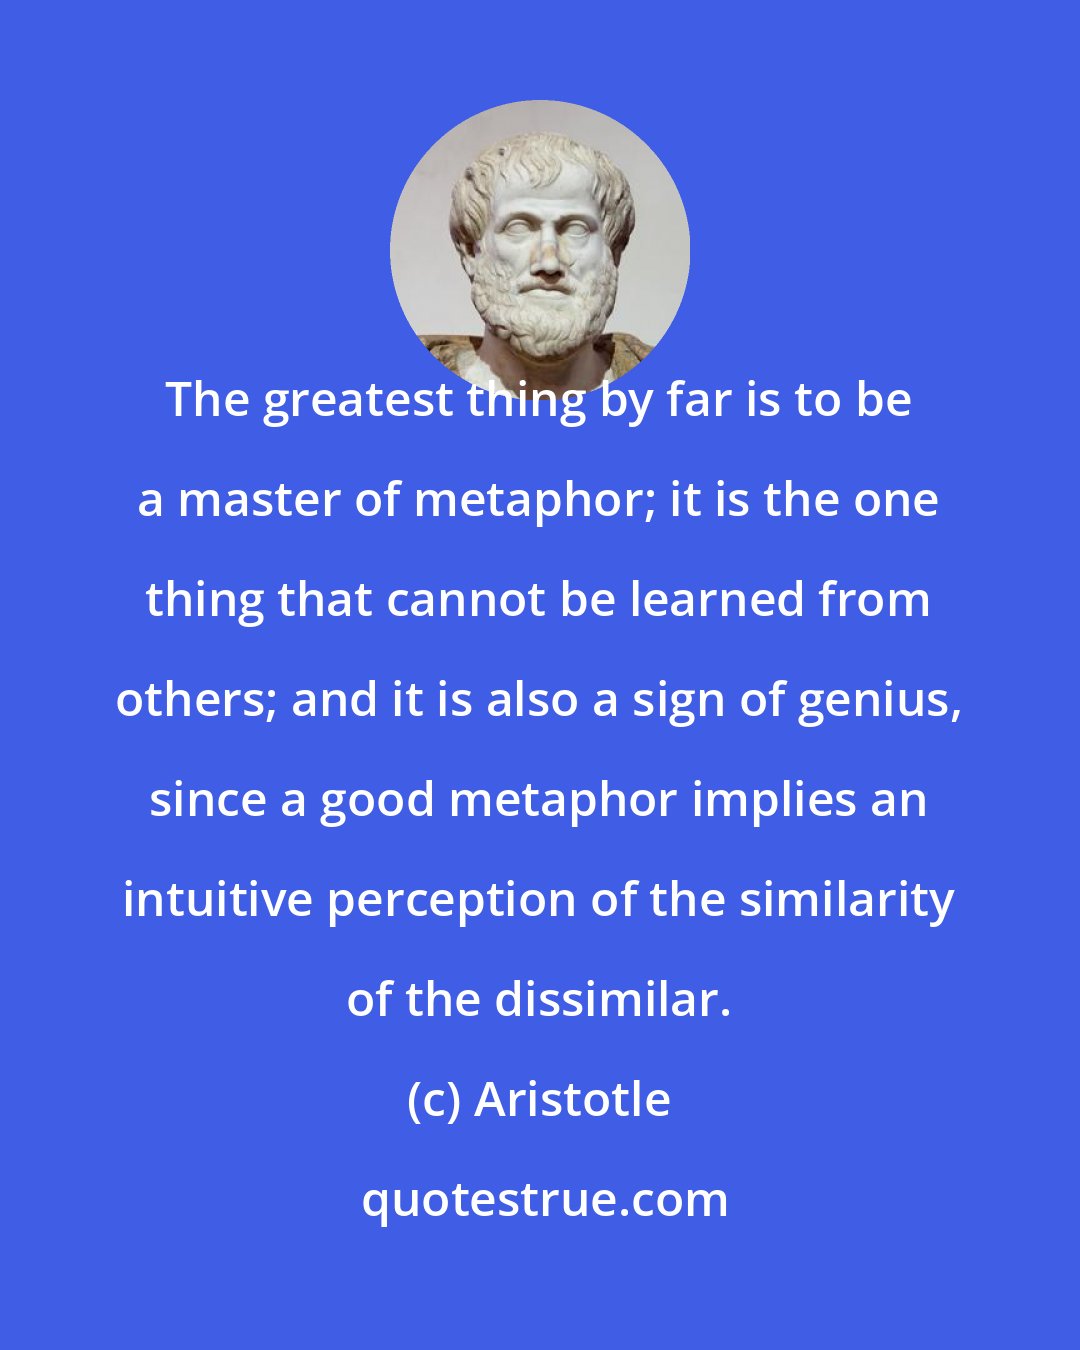 Aristotle: The greatest thing by far is to be a master of metaphor; it is the one thing that cannot be learned from others; and it is also a sign of genius, since a good metaphor implies an intuitive perception of the similarity of the dissimilar.